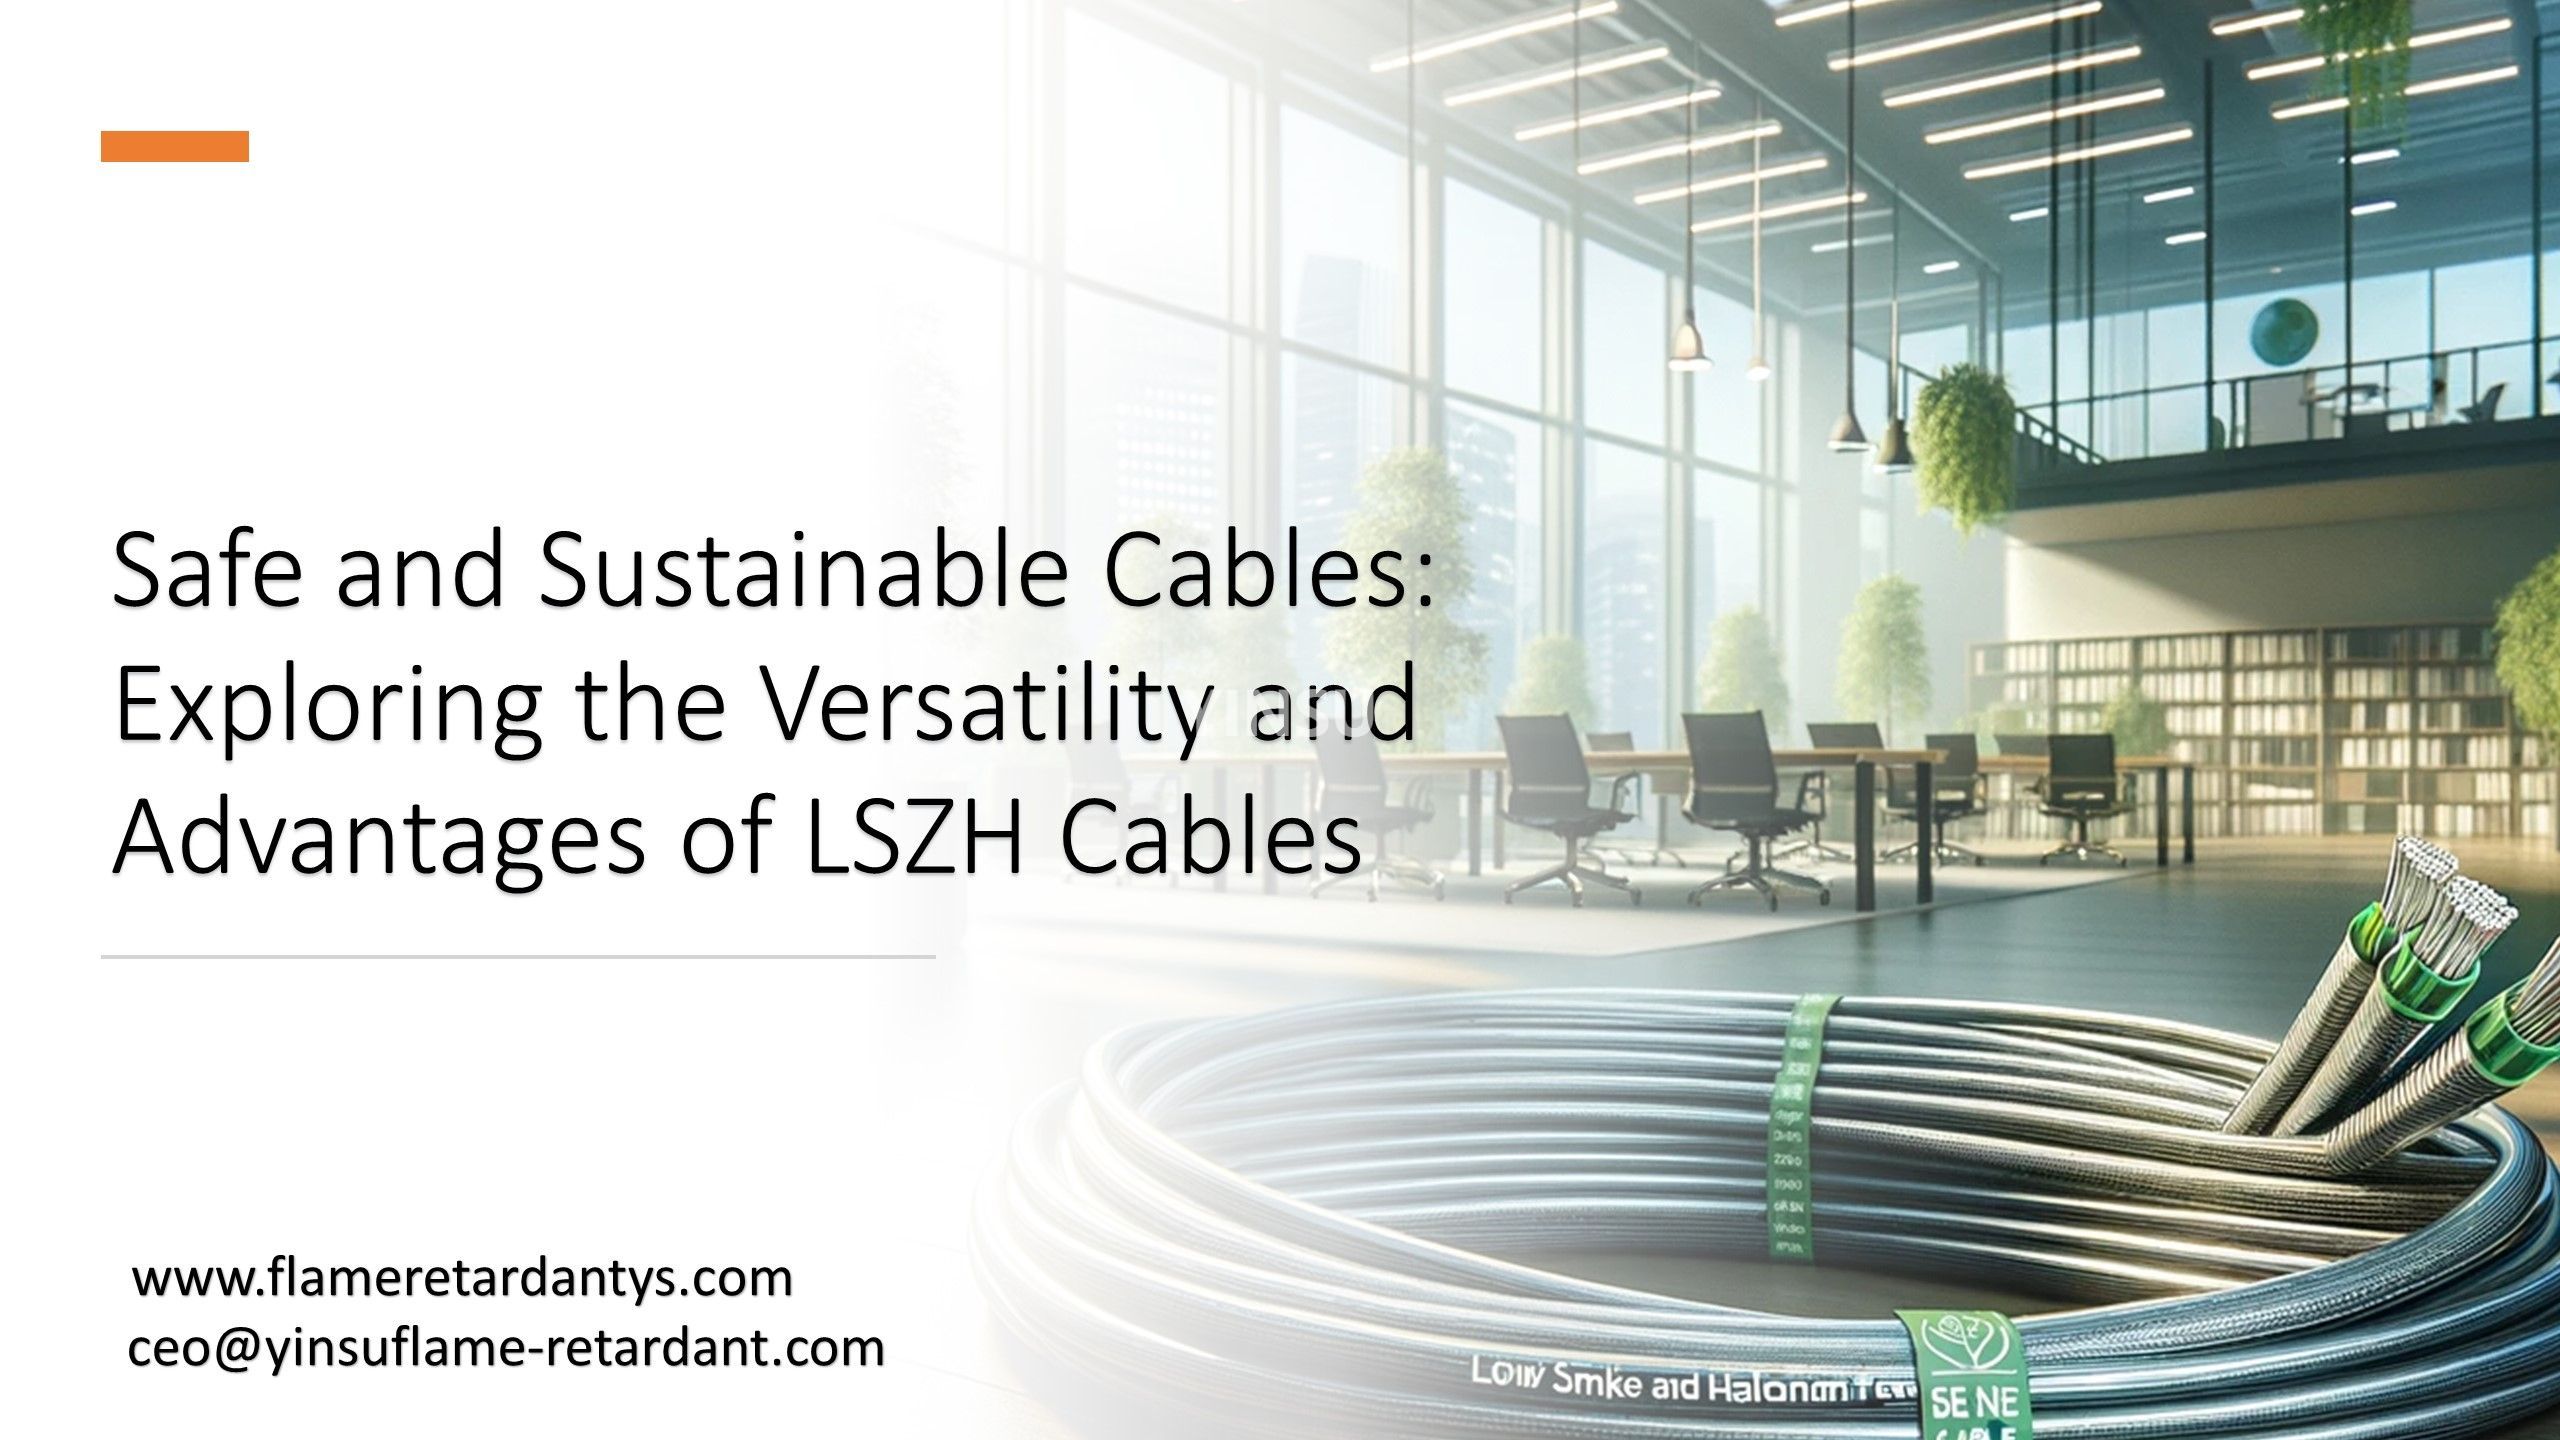 3.1 Safe and Sustainable Cables Exploring the Versatility and Advantages of LSZH Cables